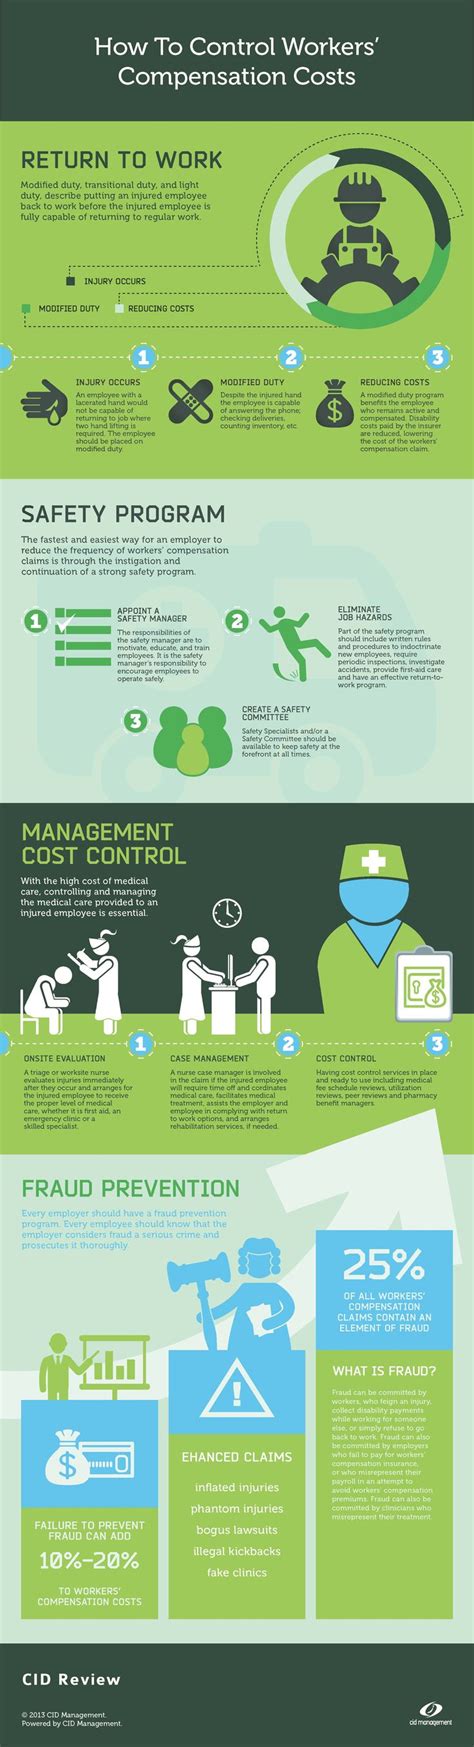 How To Control Workers Compensation Costs Visual Ly Work Injury